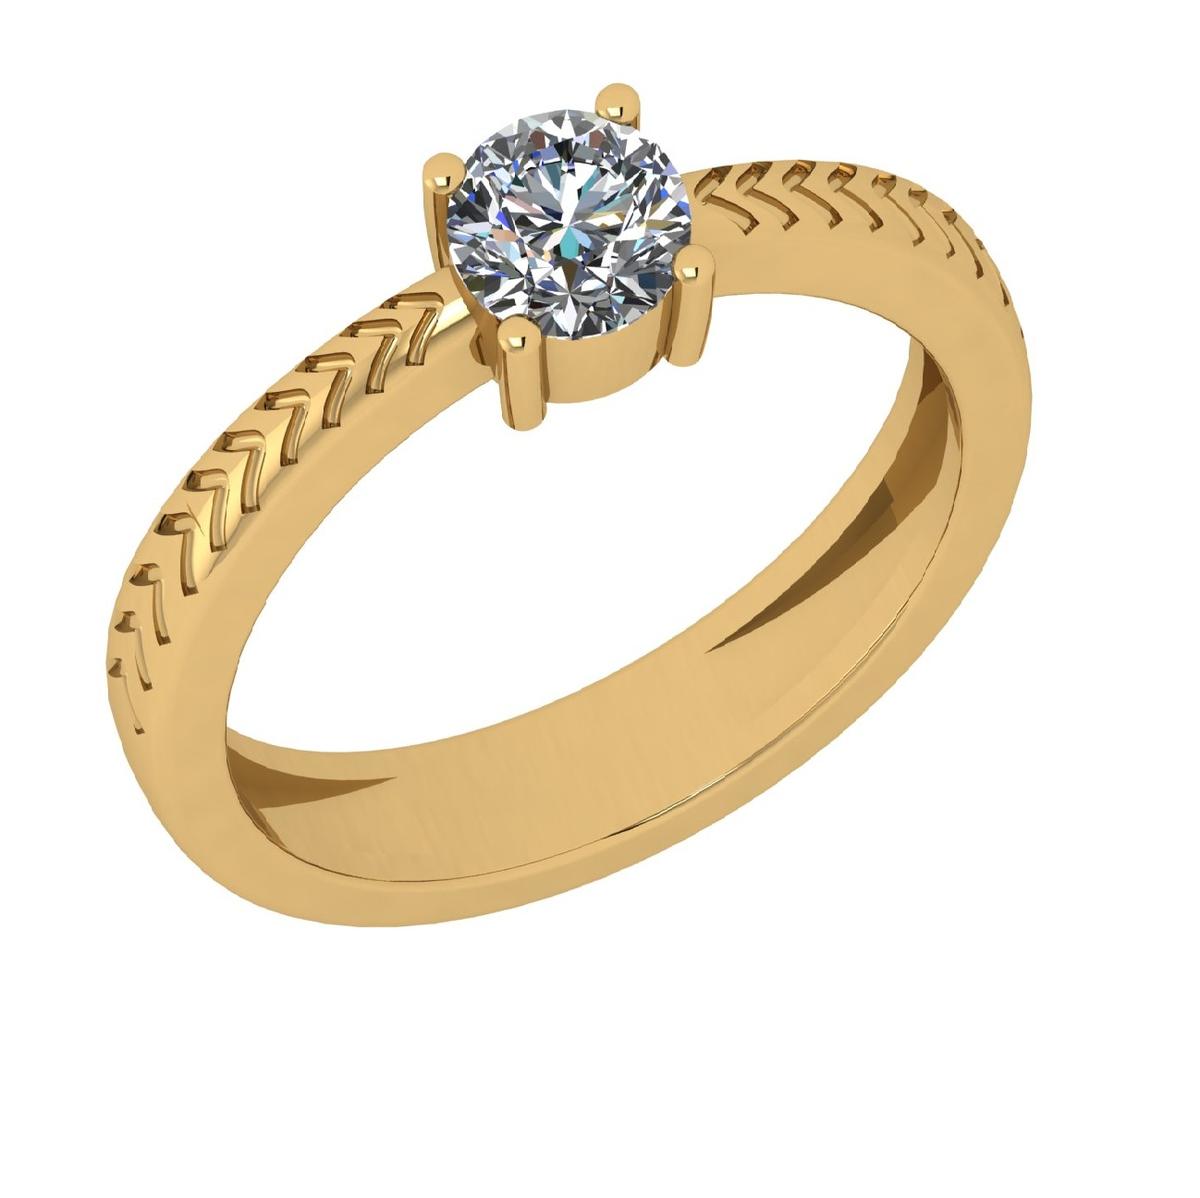 CERTIFIED 1.53 CTW D/VS1 ROUND (LAB GROWN Certified DIAMOND SOLITAIRE RING ) IN 14K YELLOW GOLD